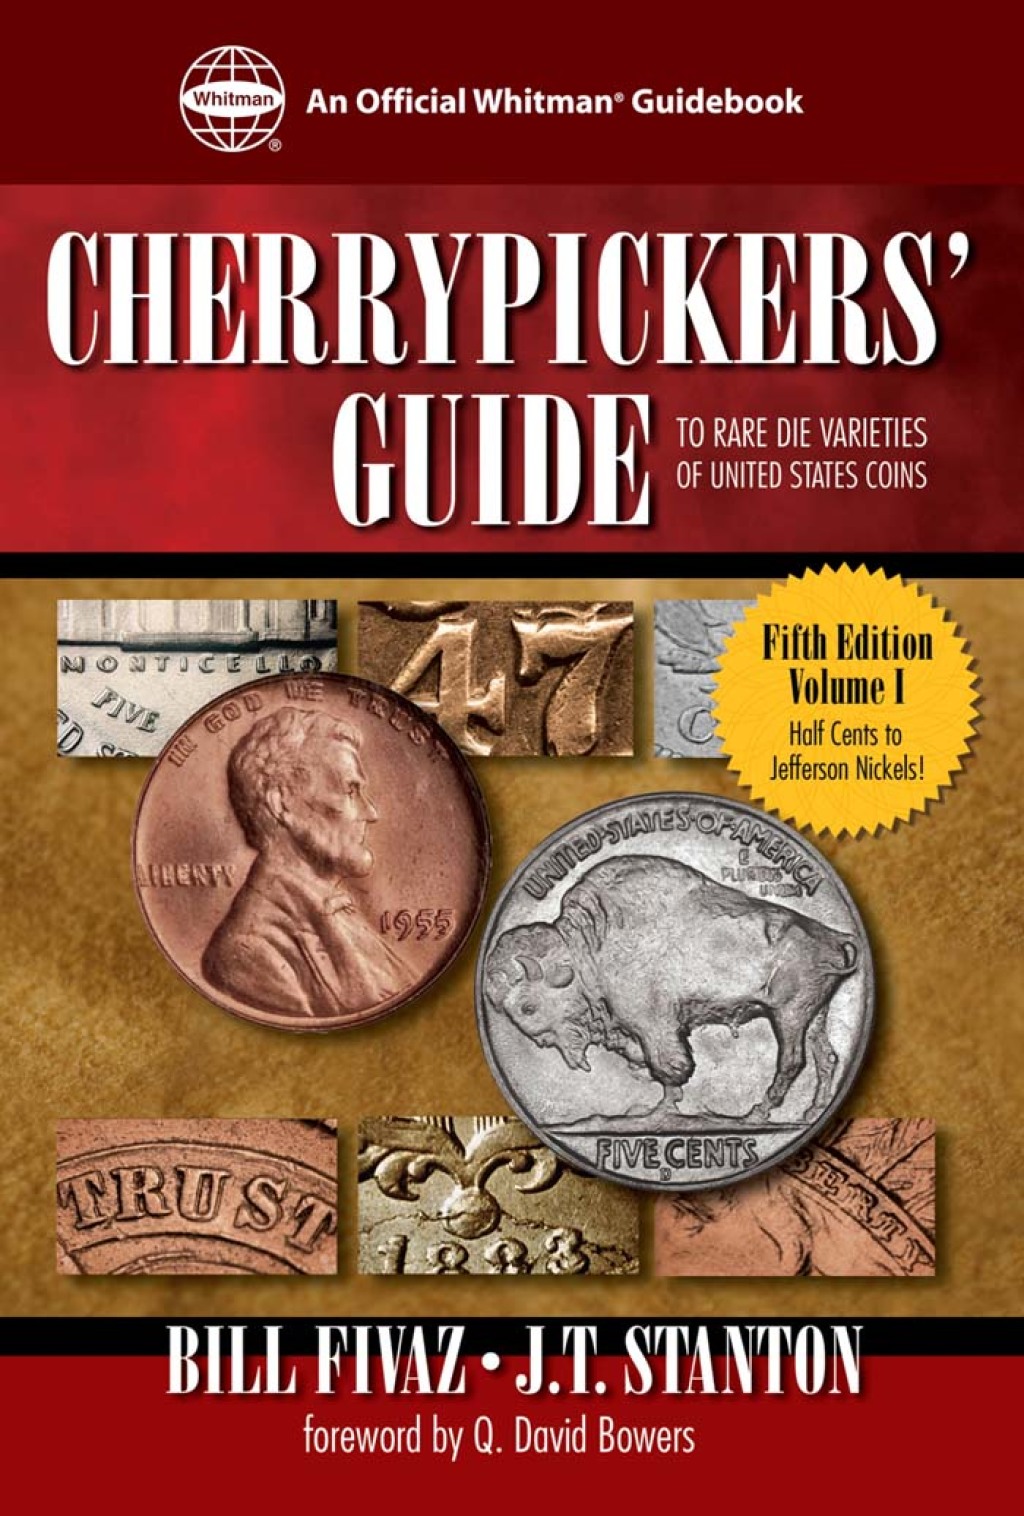 Cherrypickers' Guide to Rare Die Varieties of United States Coins - 5th Edition (eBook)